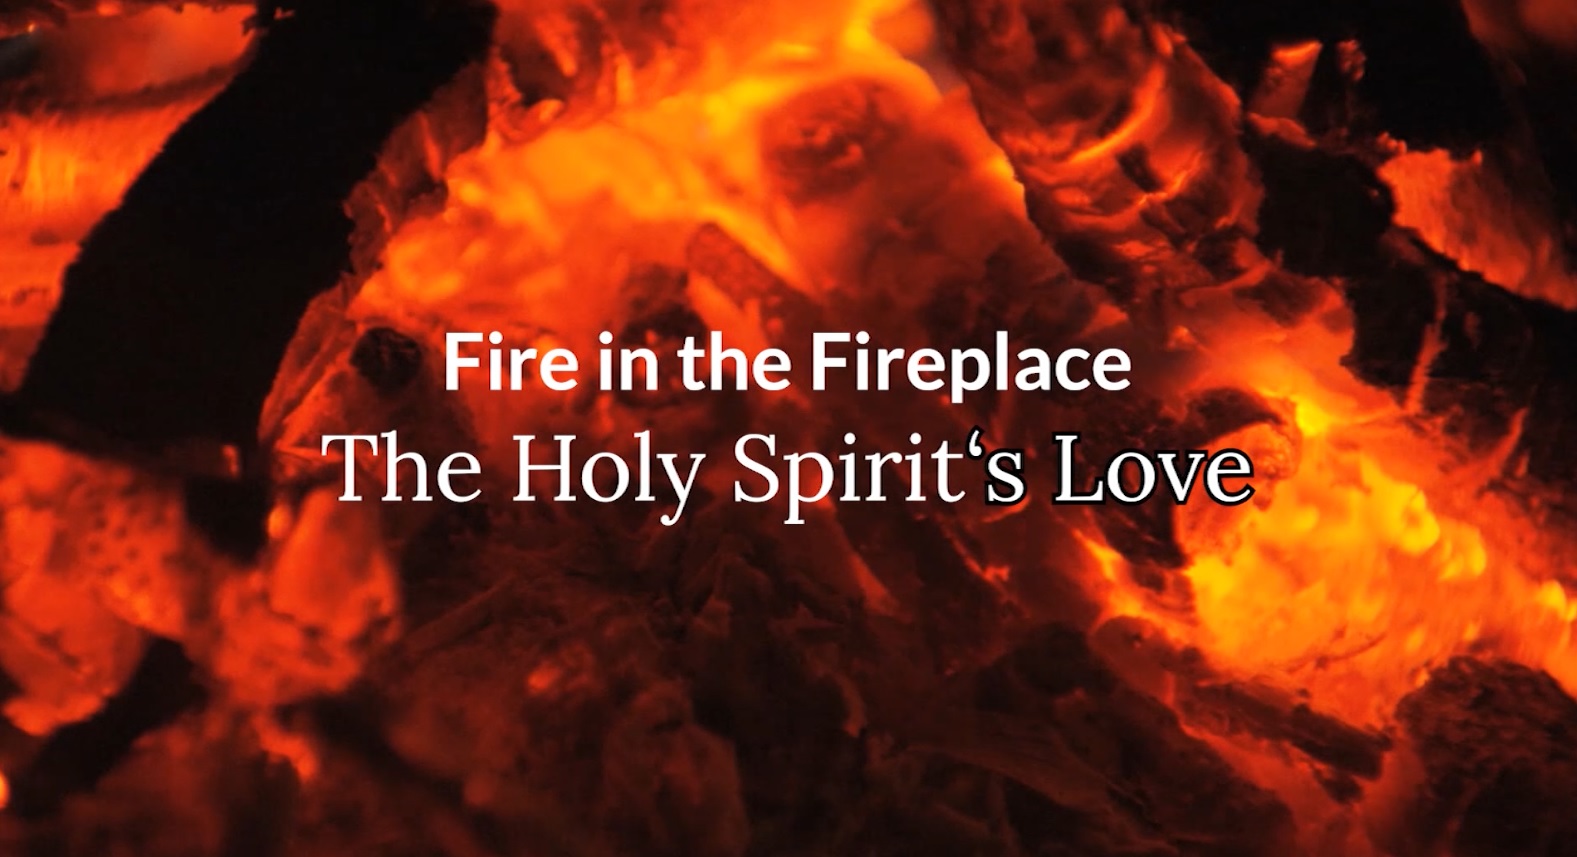 Fire in the Fireplace: the Holy Spirit’s Love